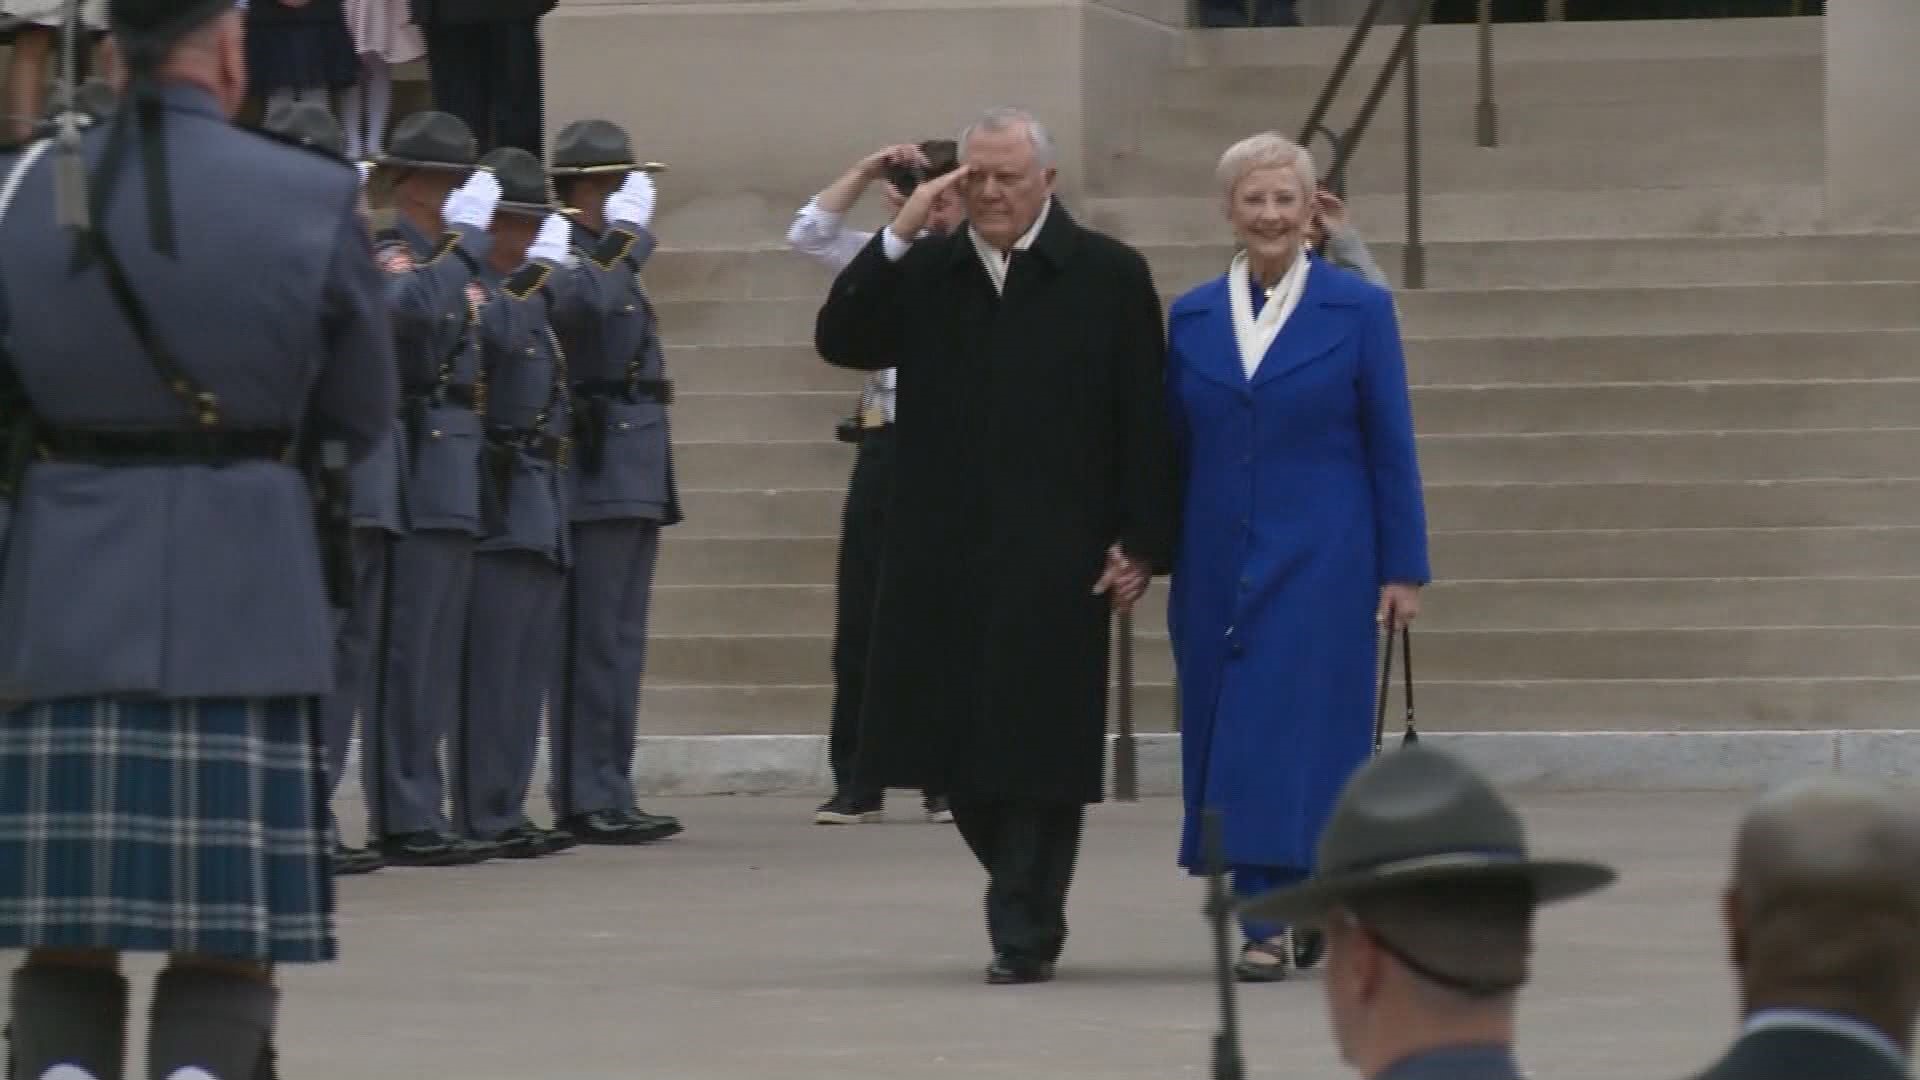 Outgoing Gov. Nathan Deal and First Lady Sandra Deal departed the State Capitol after Brian Kemp's inauguration.